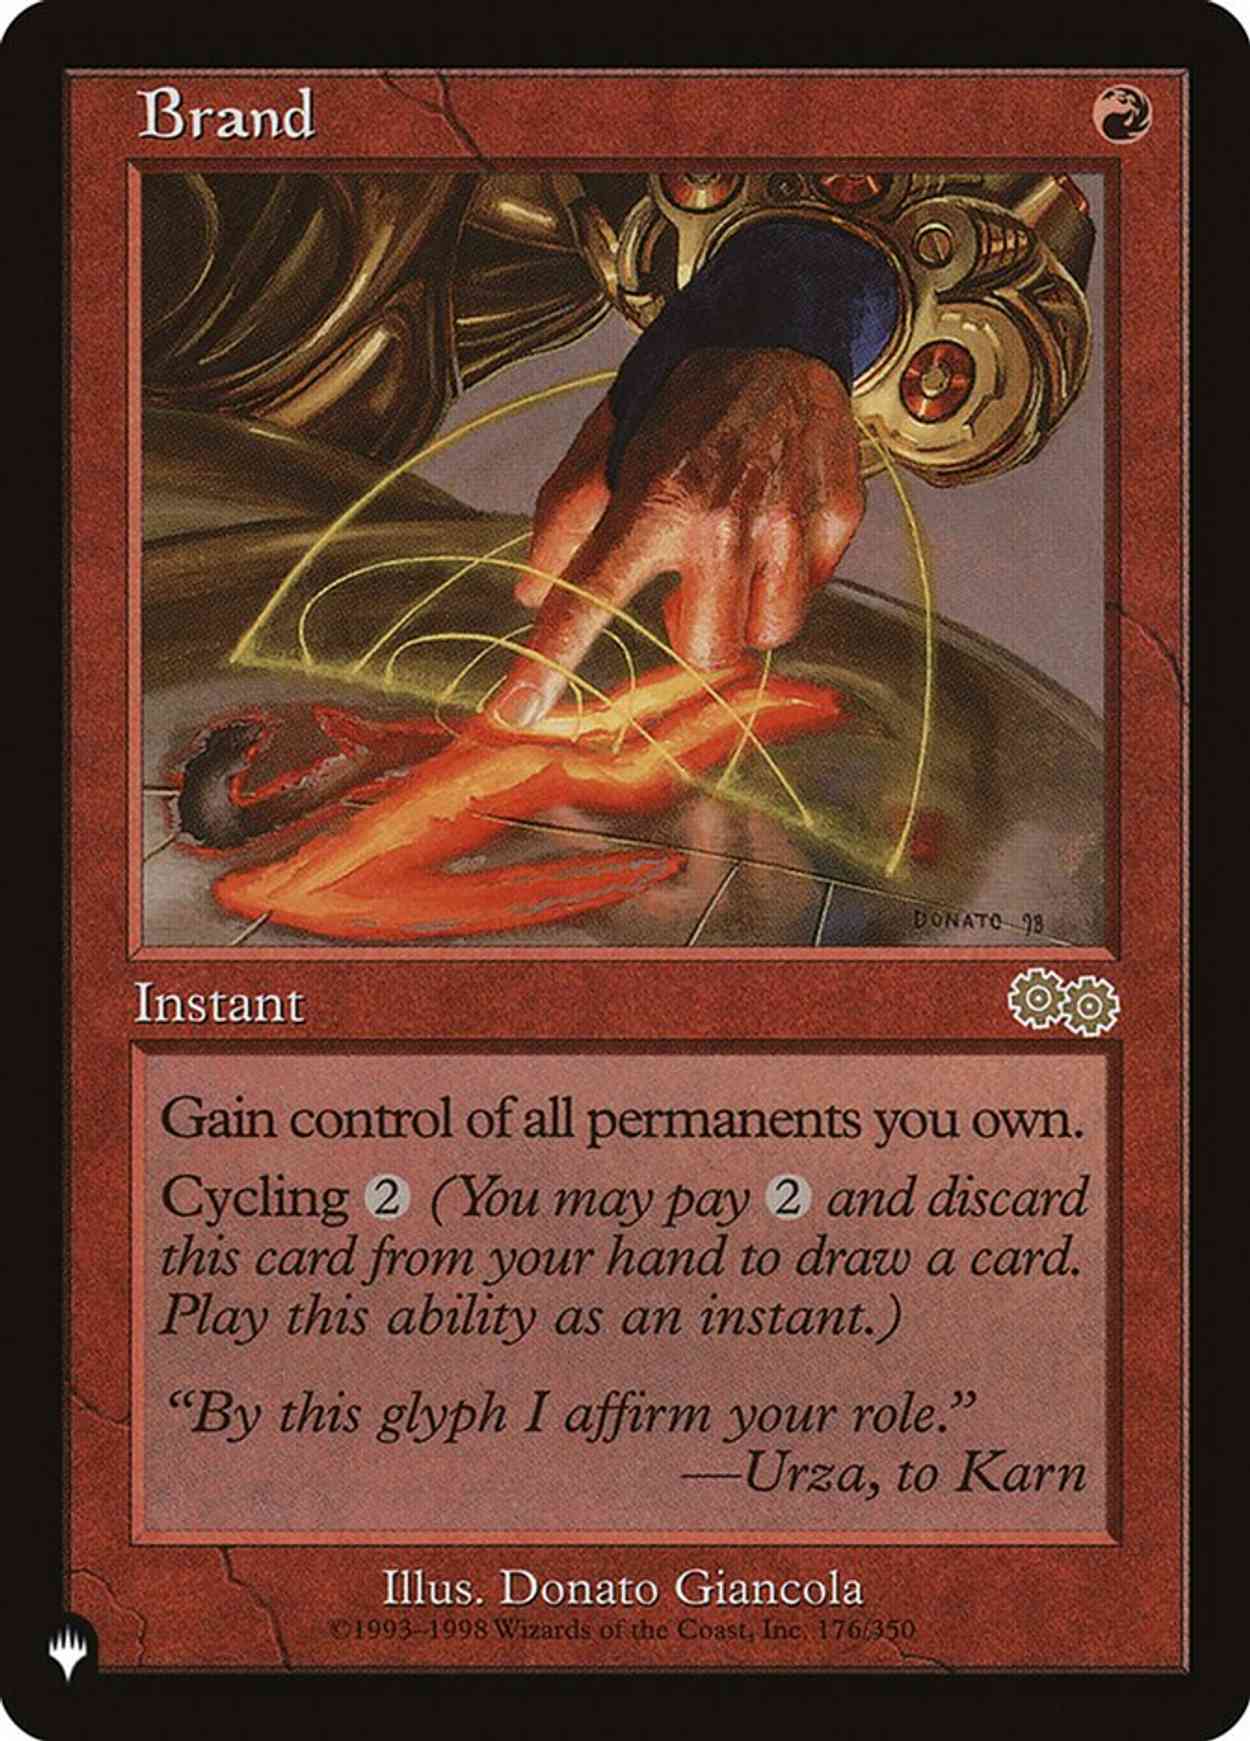 Brand magic card front